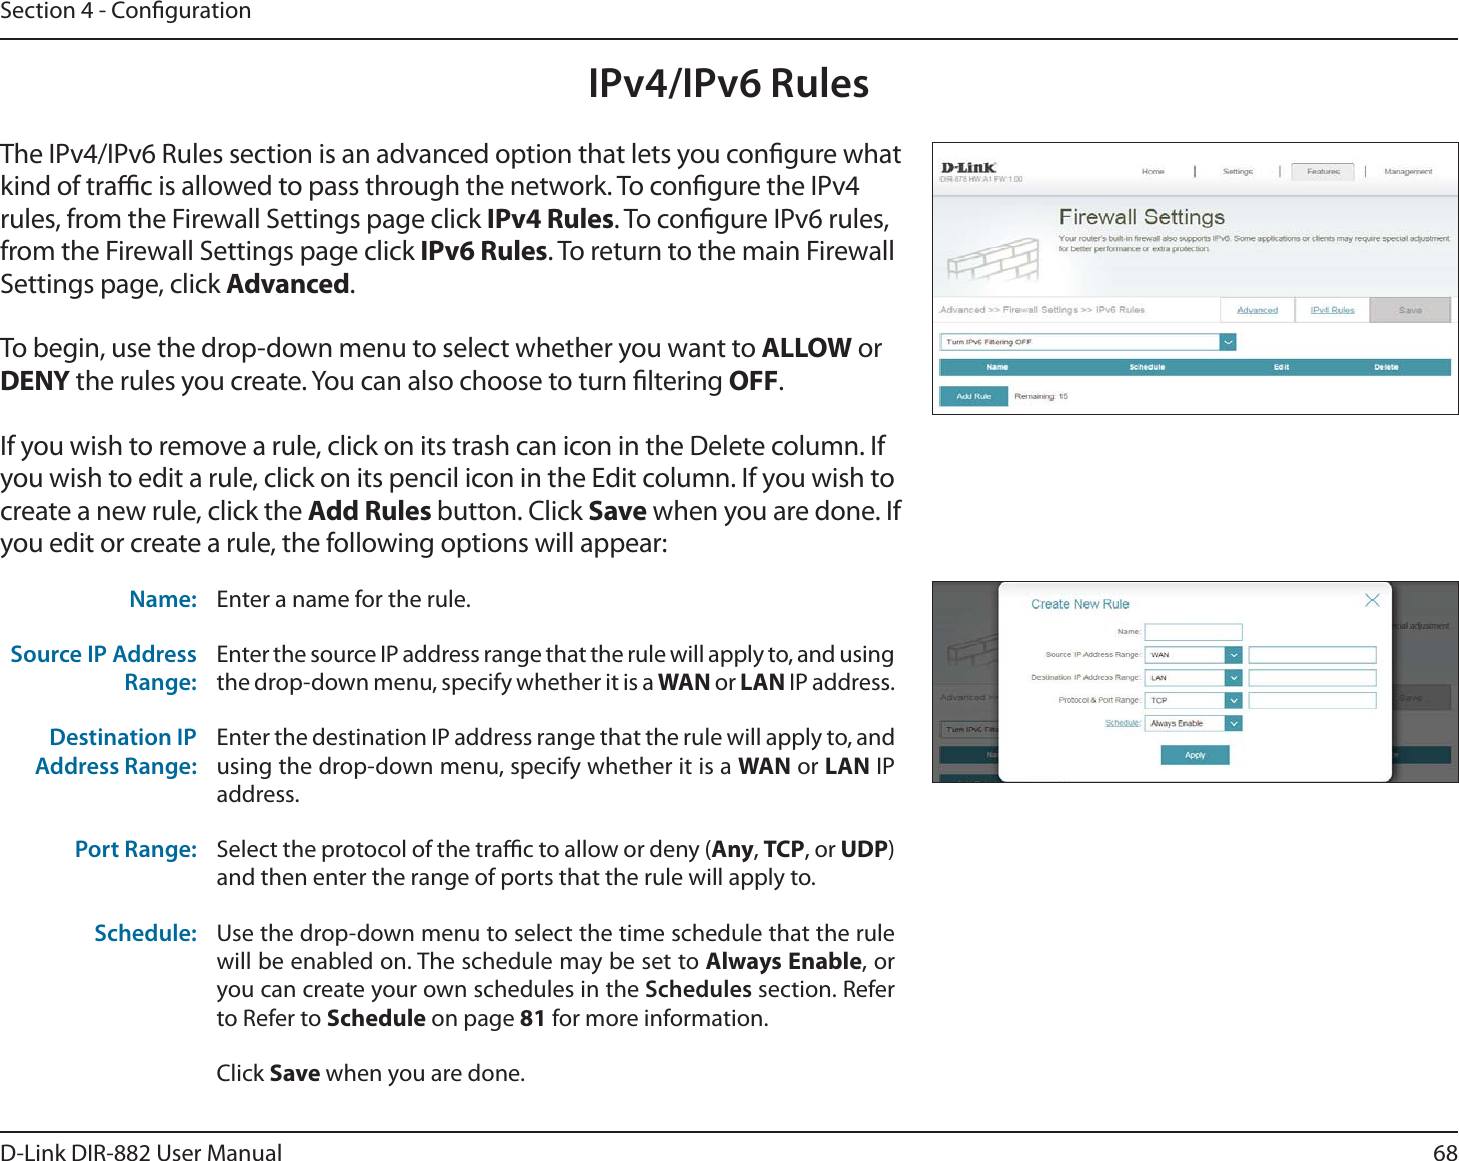 68D-Link DIR-882 User ManualSection 4 - CongurationIPv4/IPv6 RulesThe IPv4/IPv6 Rules section is an advanced option that lets you congure what kind of trac is allowed to pass through the network. To congure the IPv4 rules, from the Firewall Settings page click IPv4 Rules. To congure IPv6 rules, from the Firewall Settings page click IPv6 Rules. To return to the main Firewall Settings page, click &quot;EWBODFE.To begin, use the drop-down menu to select whether you want to &quot;--08 or %&amp;/: the rules you create. You can also choose to turn ltering 0&apos;&apos;.If you wish to remove a rule, click on its trash can icon in the Delete column. If you wish to edit a rule, click on its pencil icon in the Edit column. If you wish to create a new rule, click the &quot;EE3VMFTbutton. Click Save when you are done. If you edit or create a rule, the following options will appear:Name: Enter a name for the rule.Source IP Address Range:Enter the source IP address range that the rule will apply to, and using the drop-down menu, specify whether it is a 8&quot;/ or -&quot;/ IP address.Destination IP Address Range:Enter the destination IP address range that the rule will apply to, and using the drop-down menu, specify whether it is a 8&quot;/ or -&quot;/ IP address.Port Range: Select the protocol of the trac to allow or deny (&quot;OZ, TCP, or UDP) and then enter the range of ports that the rule will apply to.Schedule: Use the drop-down menu to select the time schedule that the rule will be enabled on. The schedule may be set to &quot;MXBZT&amp;OBCMF, or you can create your own schedules in the Schedules section. Refer to Refer to Schedule on page 81 for more information.Click Save when you are done.